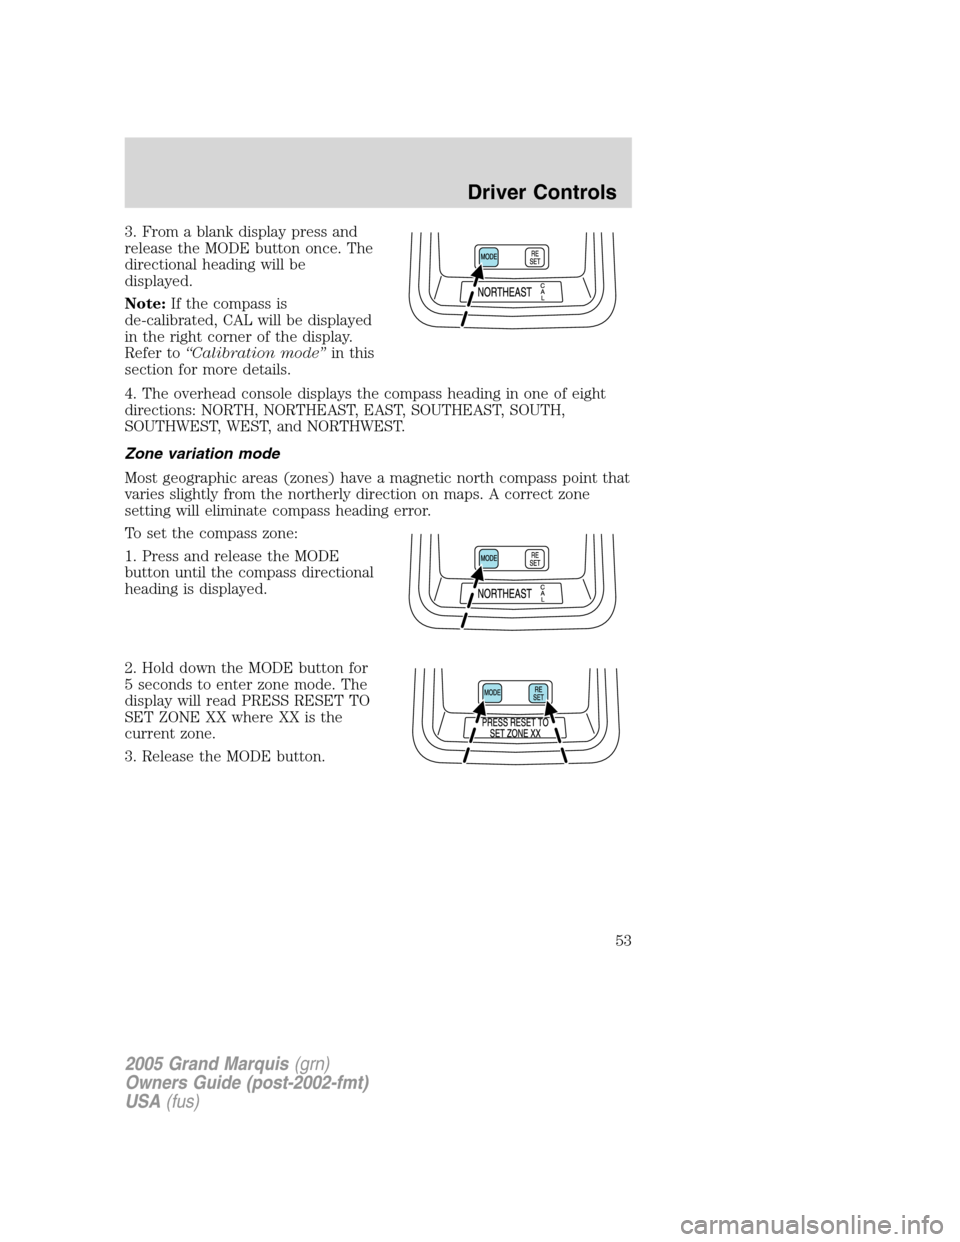 Mercury Grand Marquis 2005  s Workshop Manual 3. From a blank display press and
release the MODE button once. The
directional heading will be
displayed.
Note:If the compass is
de-calibrated, CAL will be displayed
in the right corner of the displa